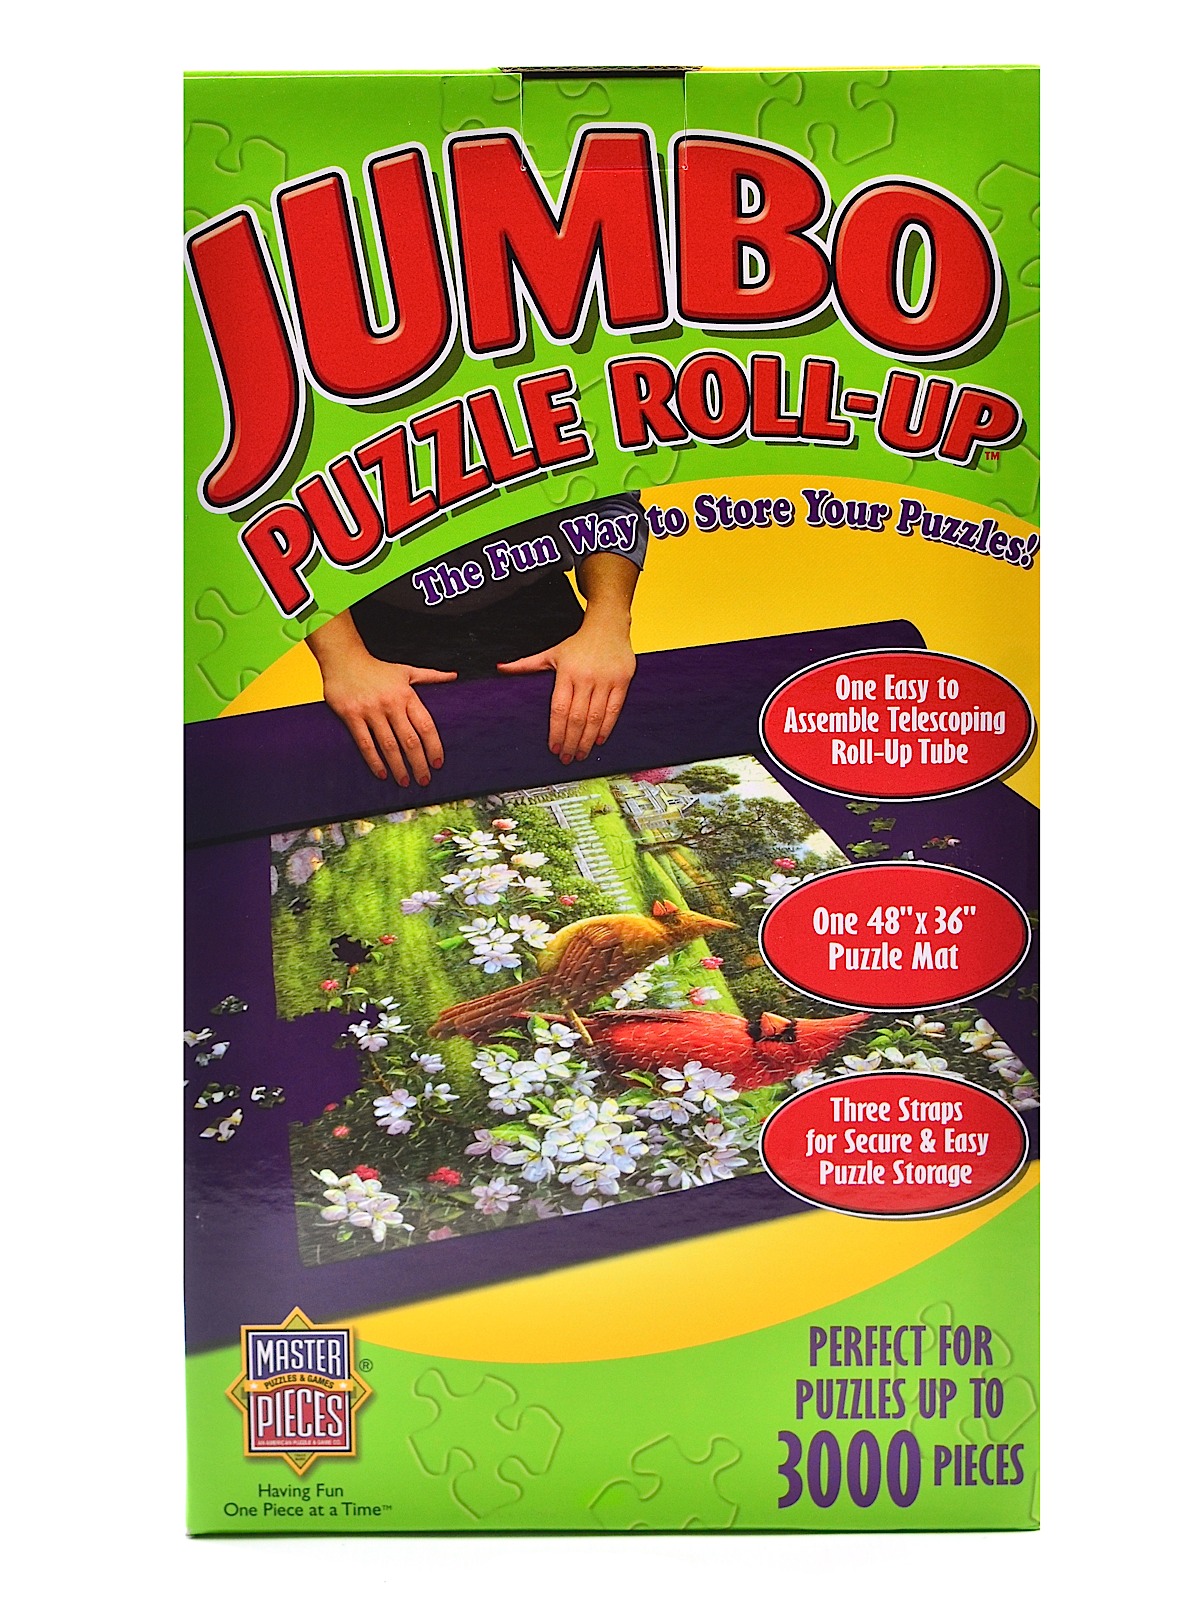 Puzzle Roll-up 36 In. X 48 In.